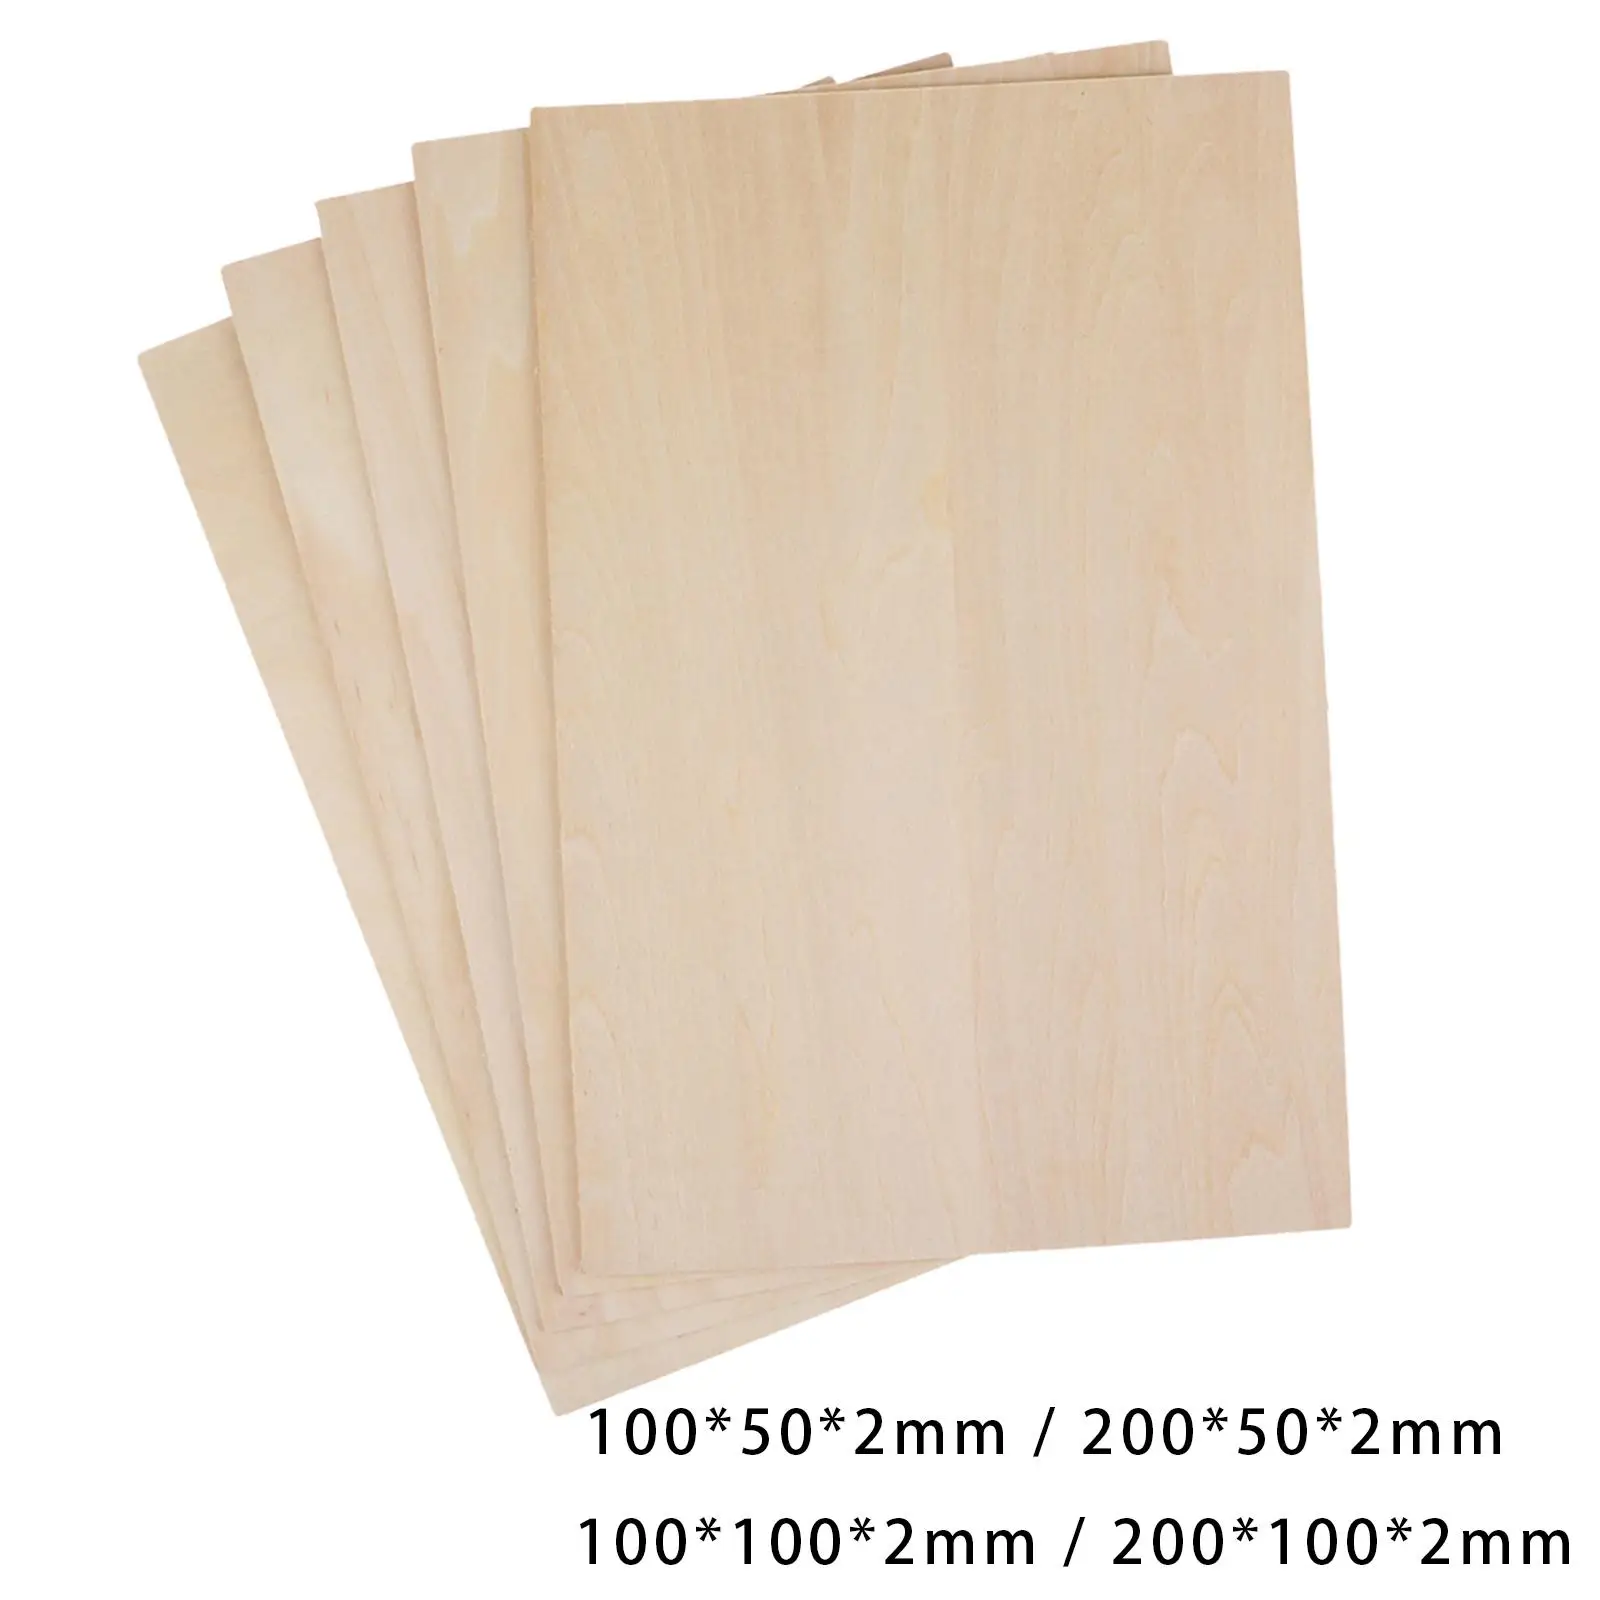 10Pcs Unfinished Wood Basswood Sheets Thin Plywood Board for Mini House Crafts DIY Project Miniature Aircraft Making Plane Model